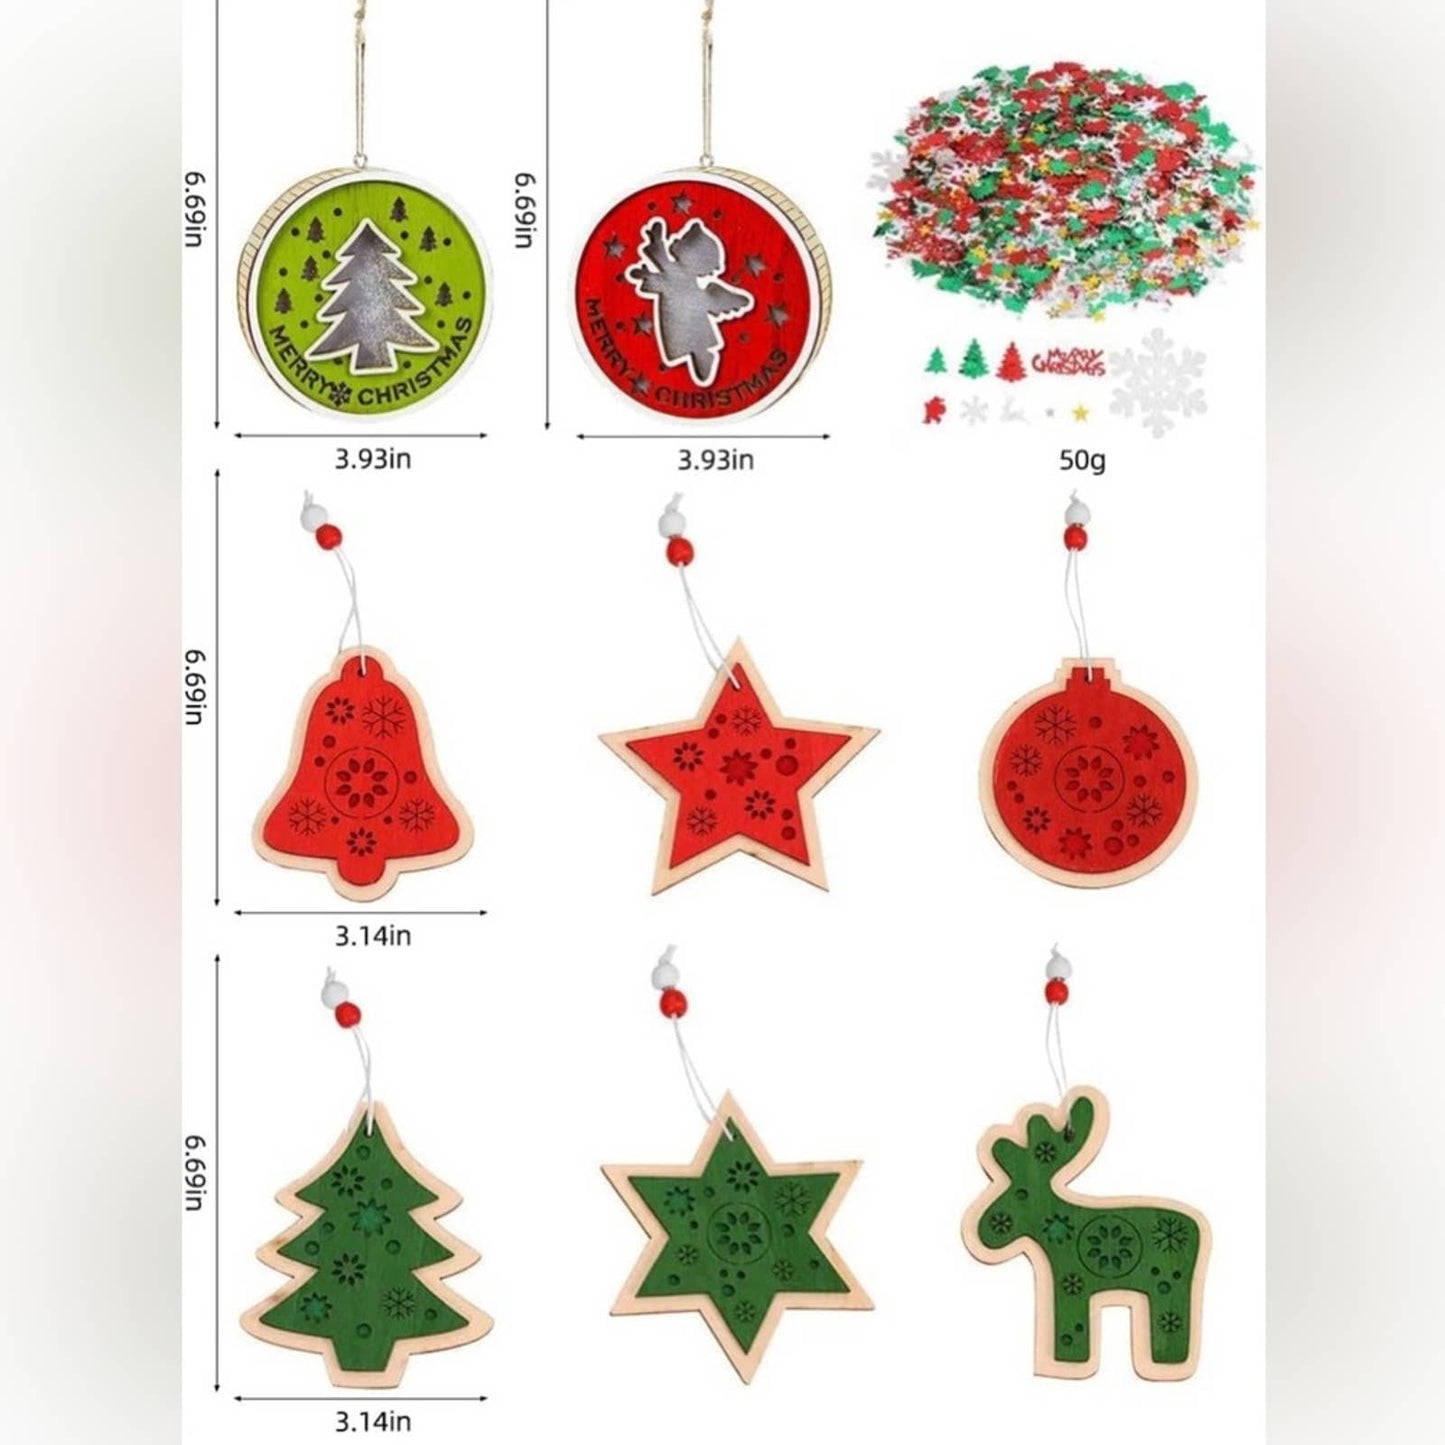 TOBENUB Christmas Decorations, Wooden Christmas Ornaments for Hanging Decoration